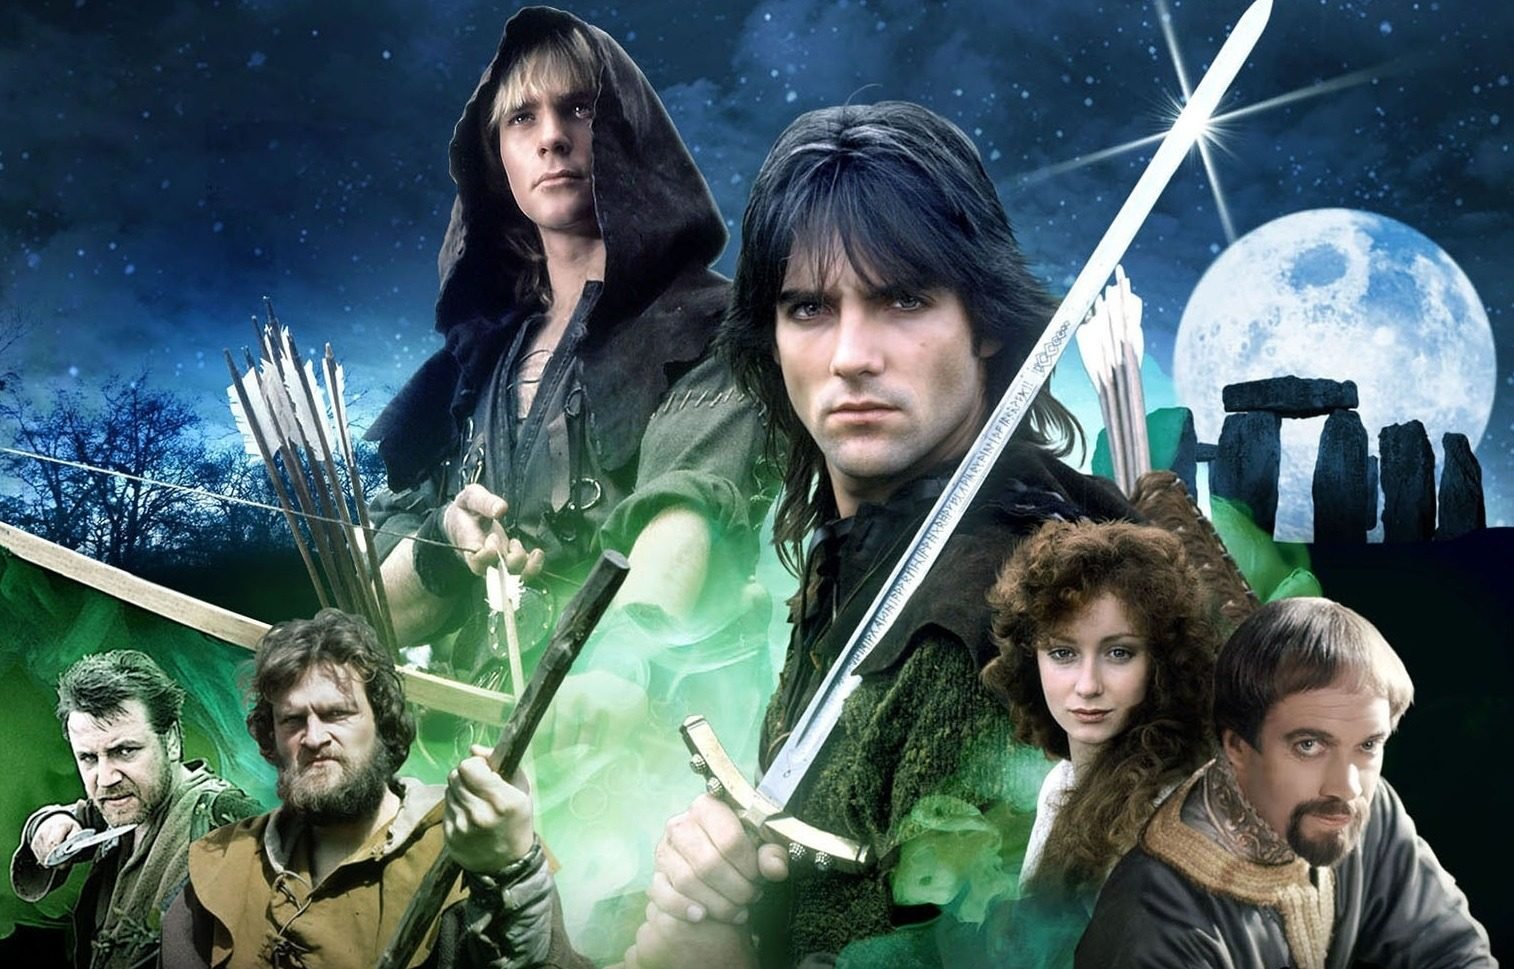 Robin of Sherwood: Still the quintessential take on the Robin Hood legend